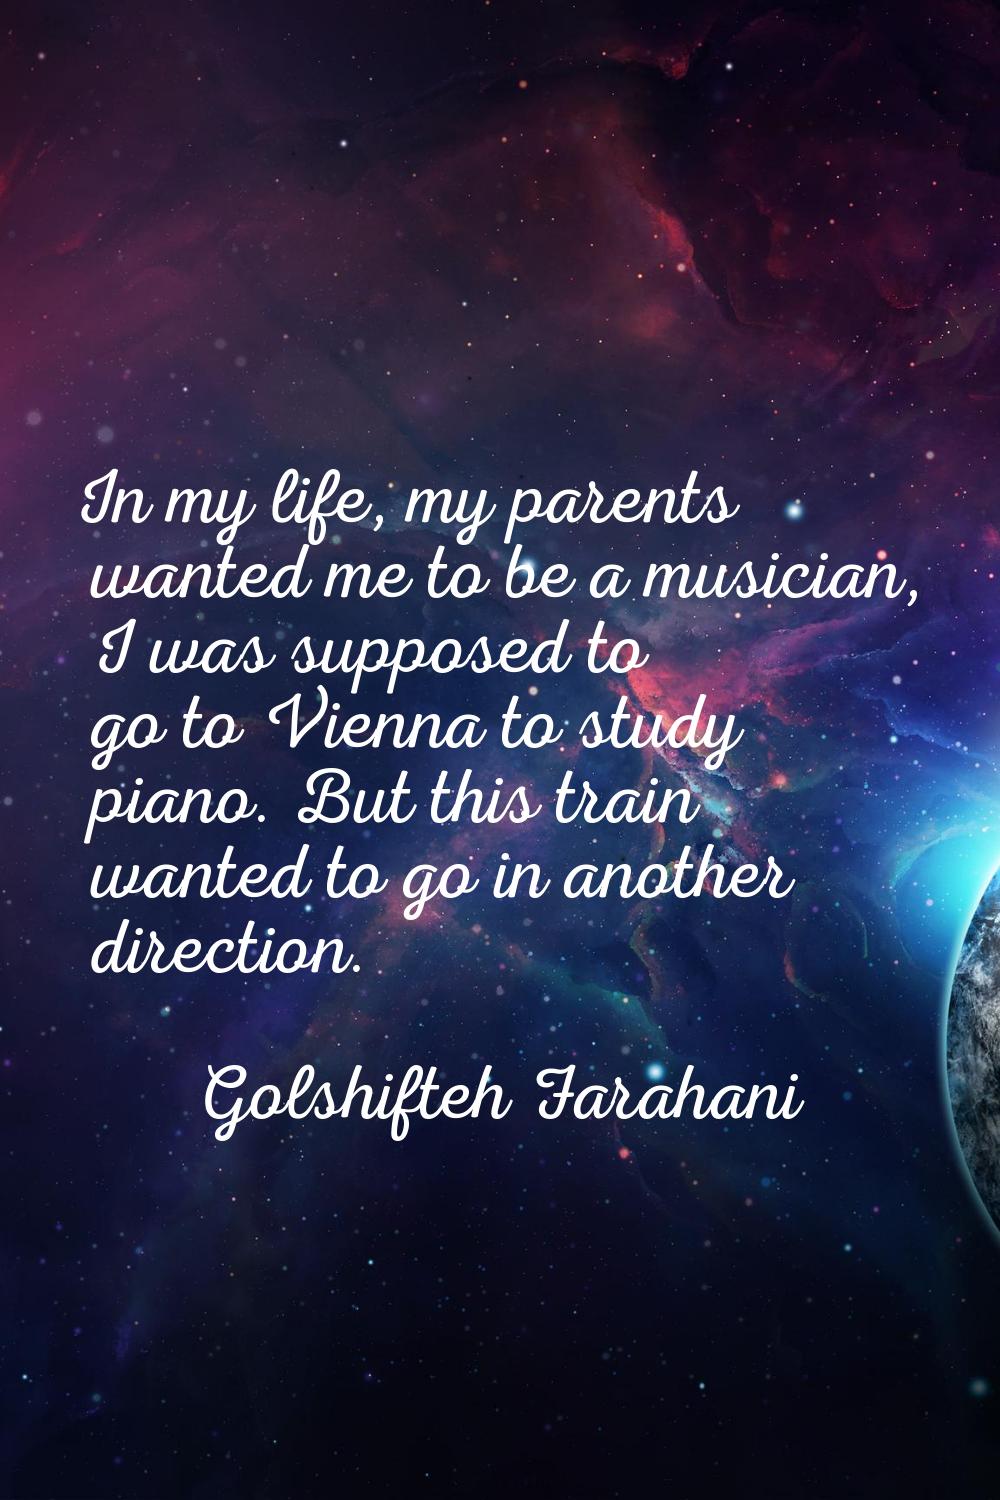 In my life, my parents wanted me to be a musician, I was supposed to go to Vienna to study piano. B